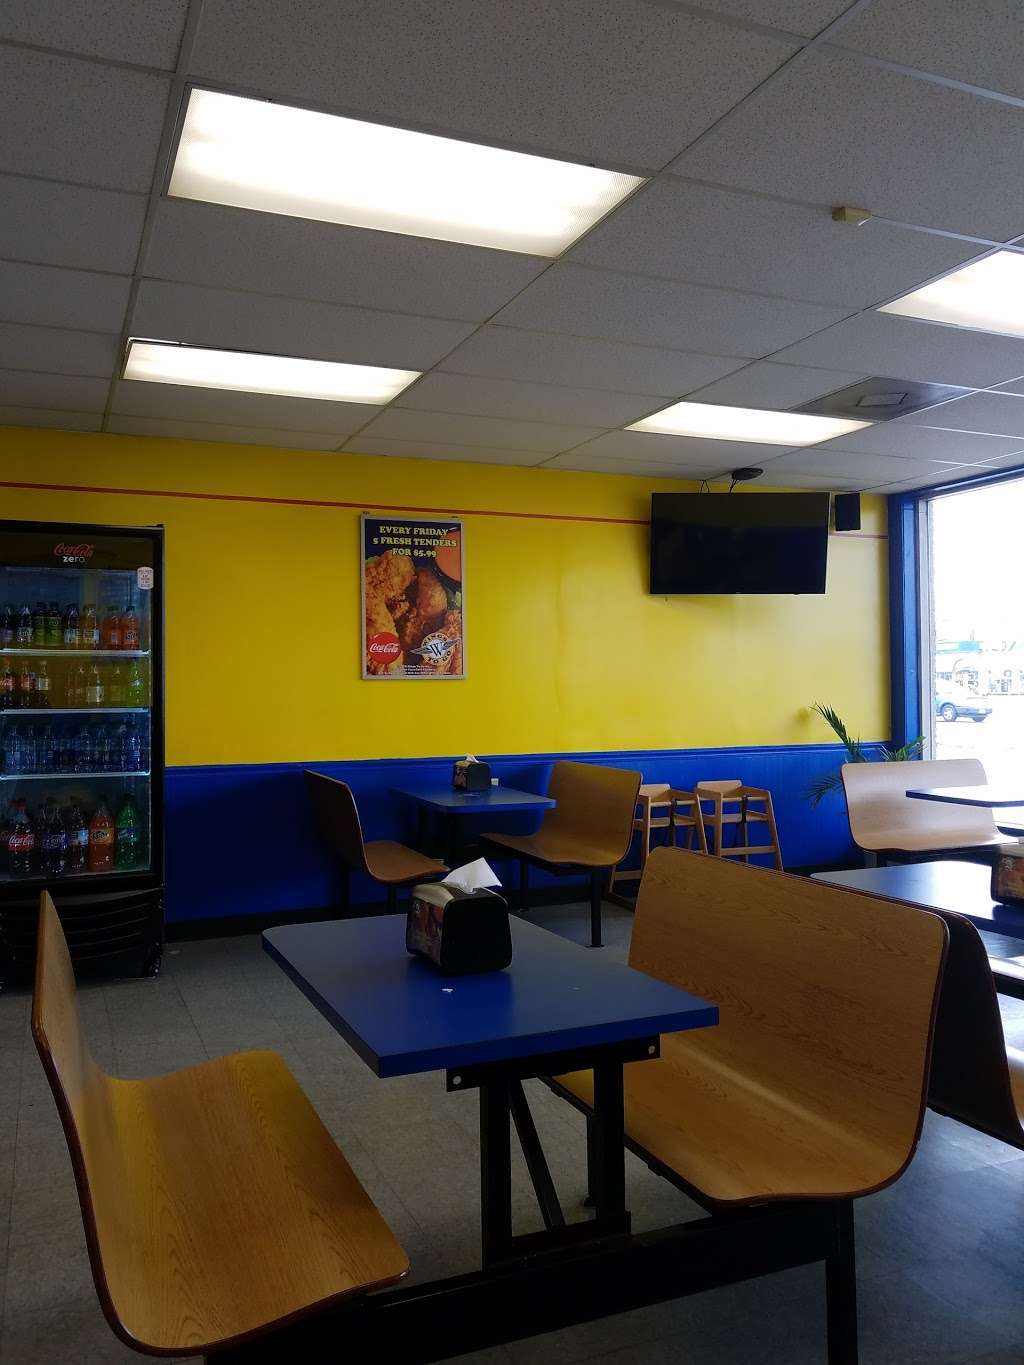 Wings To Go - New Castle | 1404 N Dupont Hwy, New Castle, DE 19720, USA | Phone: (302) 322-5050